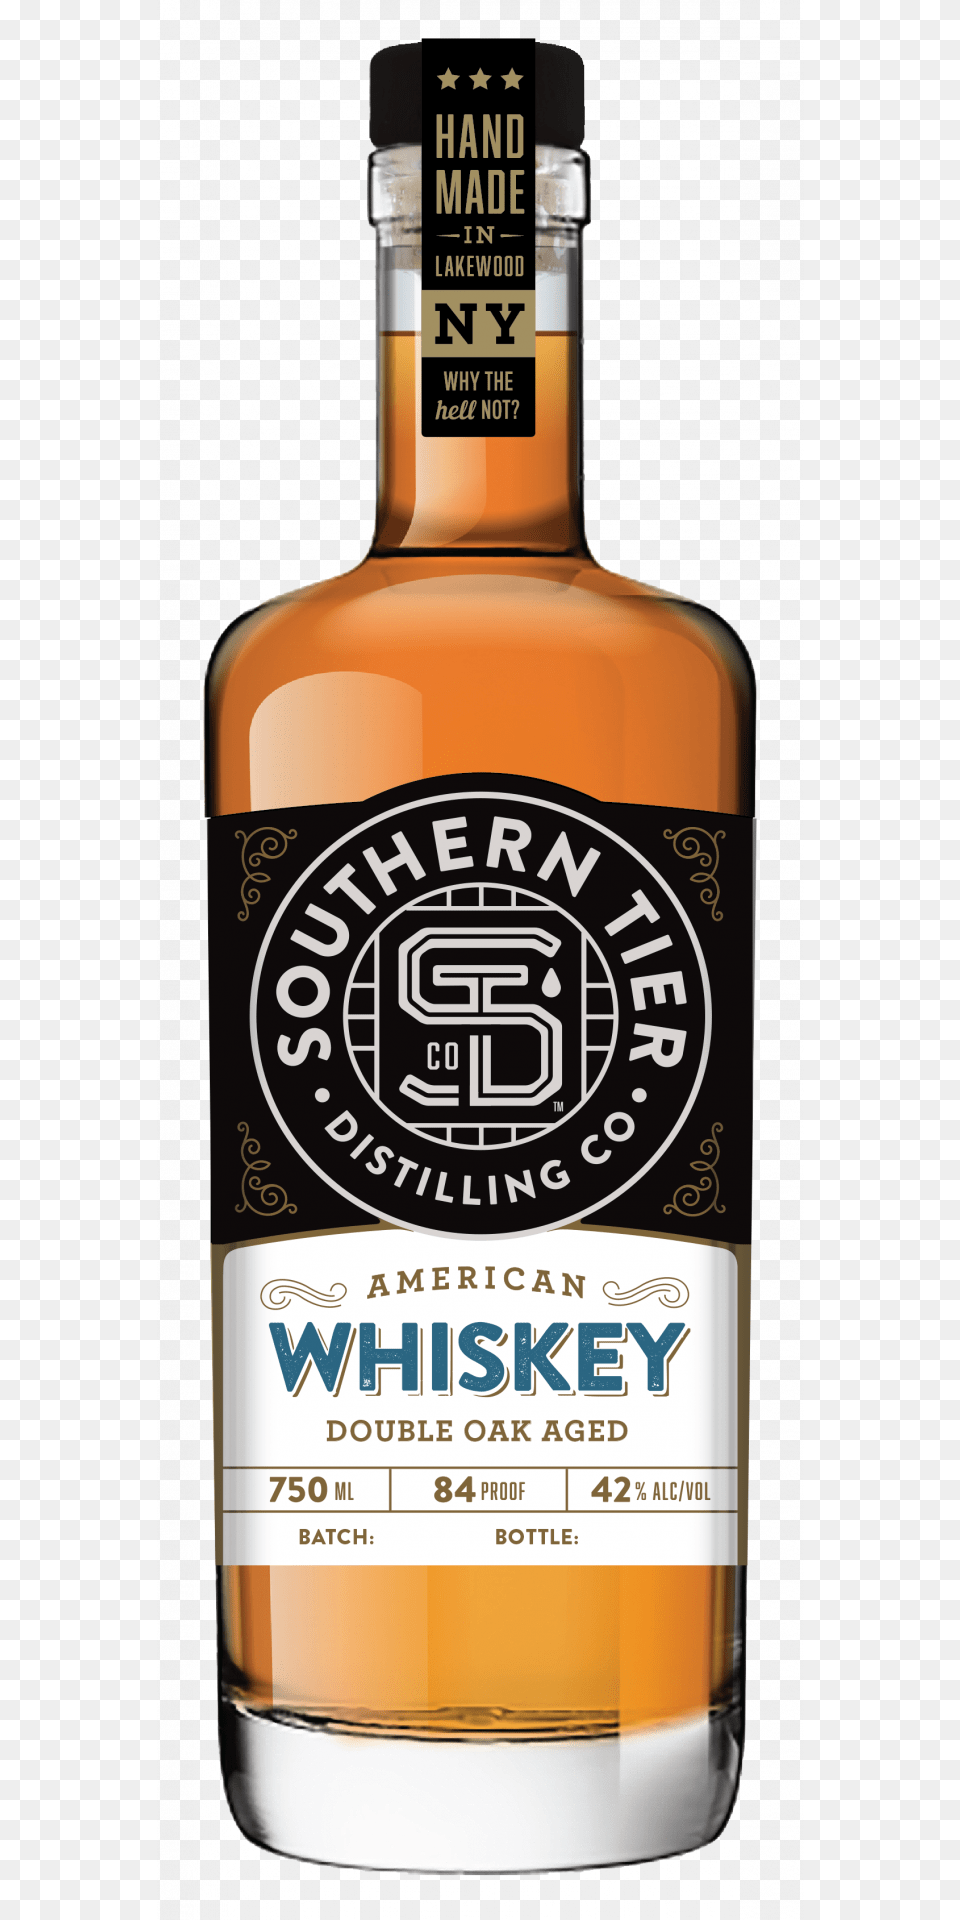 Southern Tier Smoked Bourbon Whiskey, Alcohol, Beverage, Liquor, Whisky Png